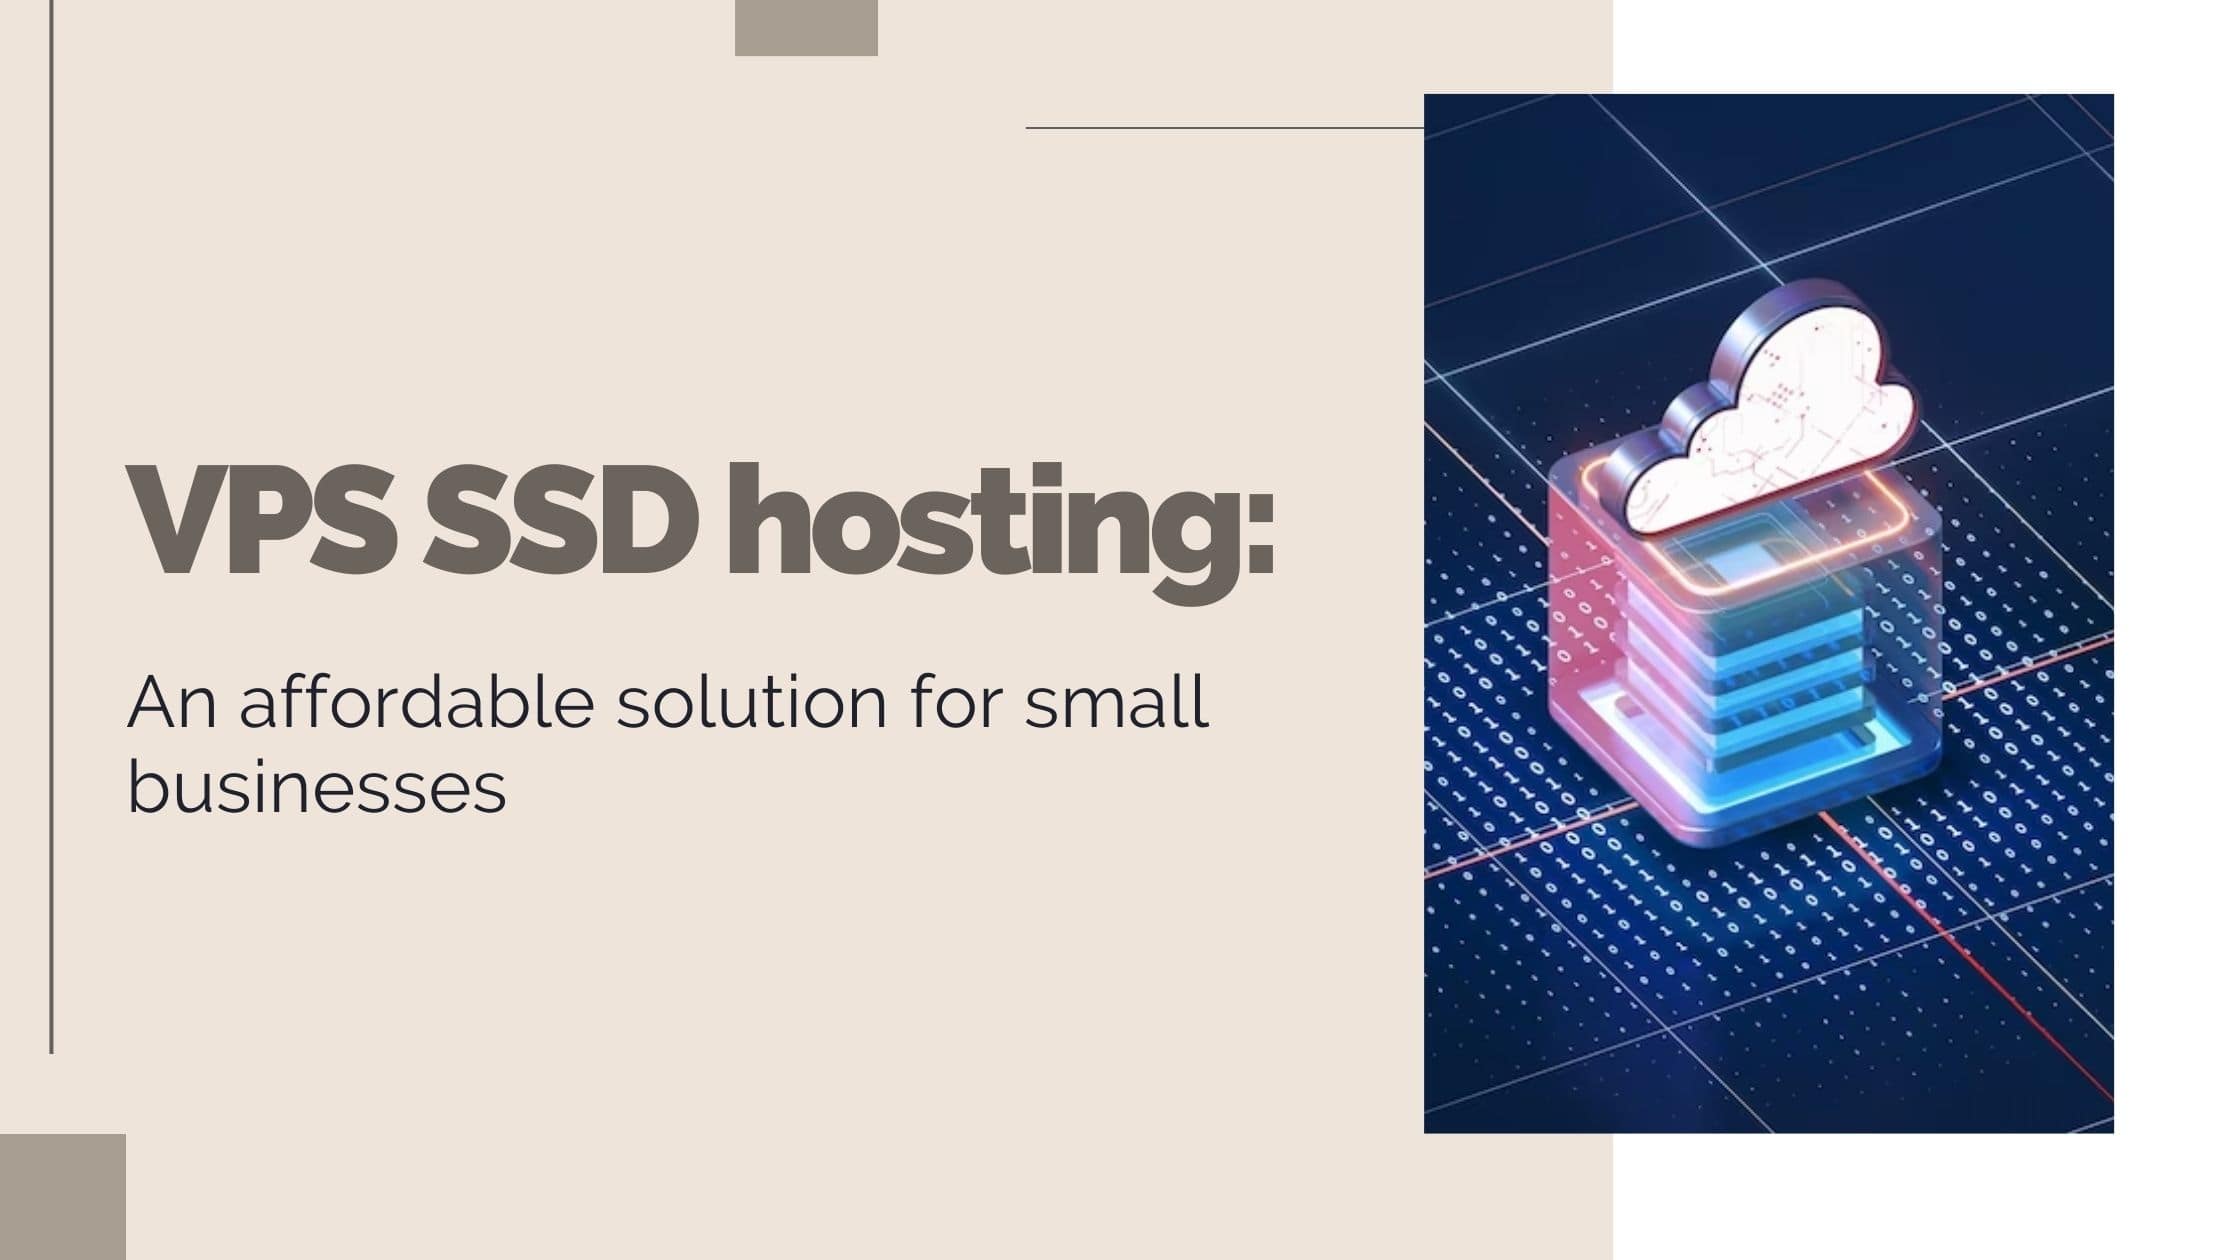 VPS SSD hosting: An affordable solution for small businesses